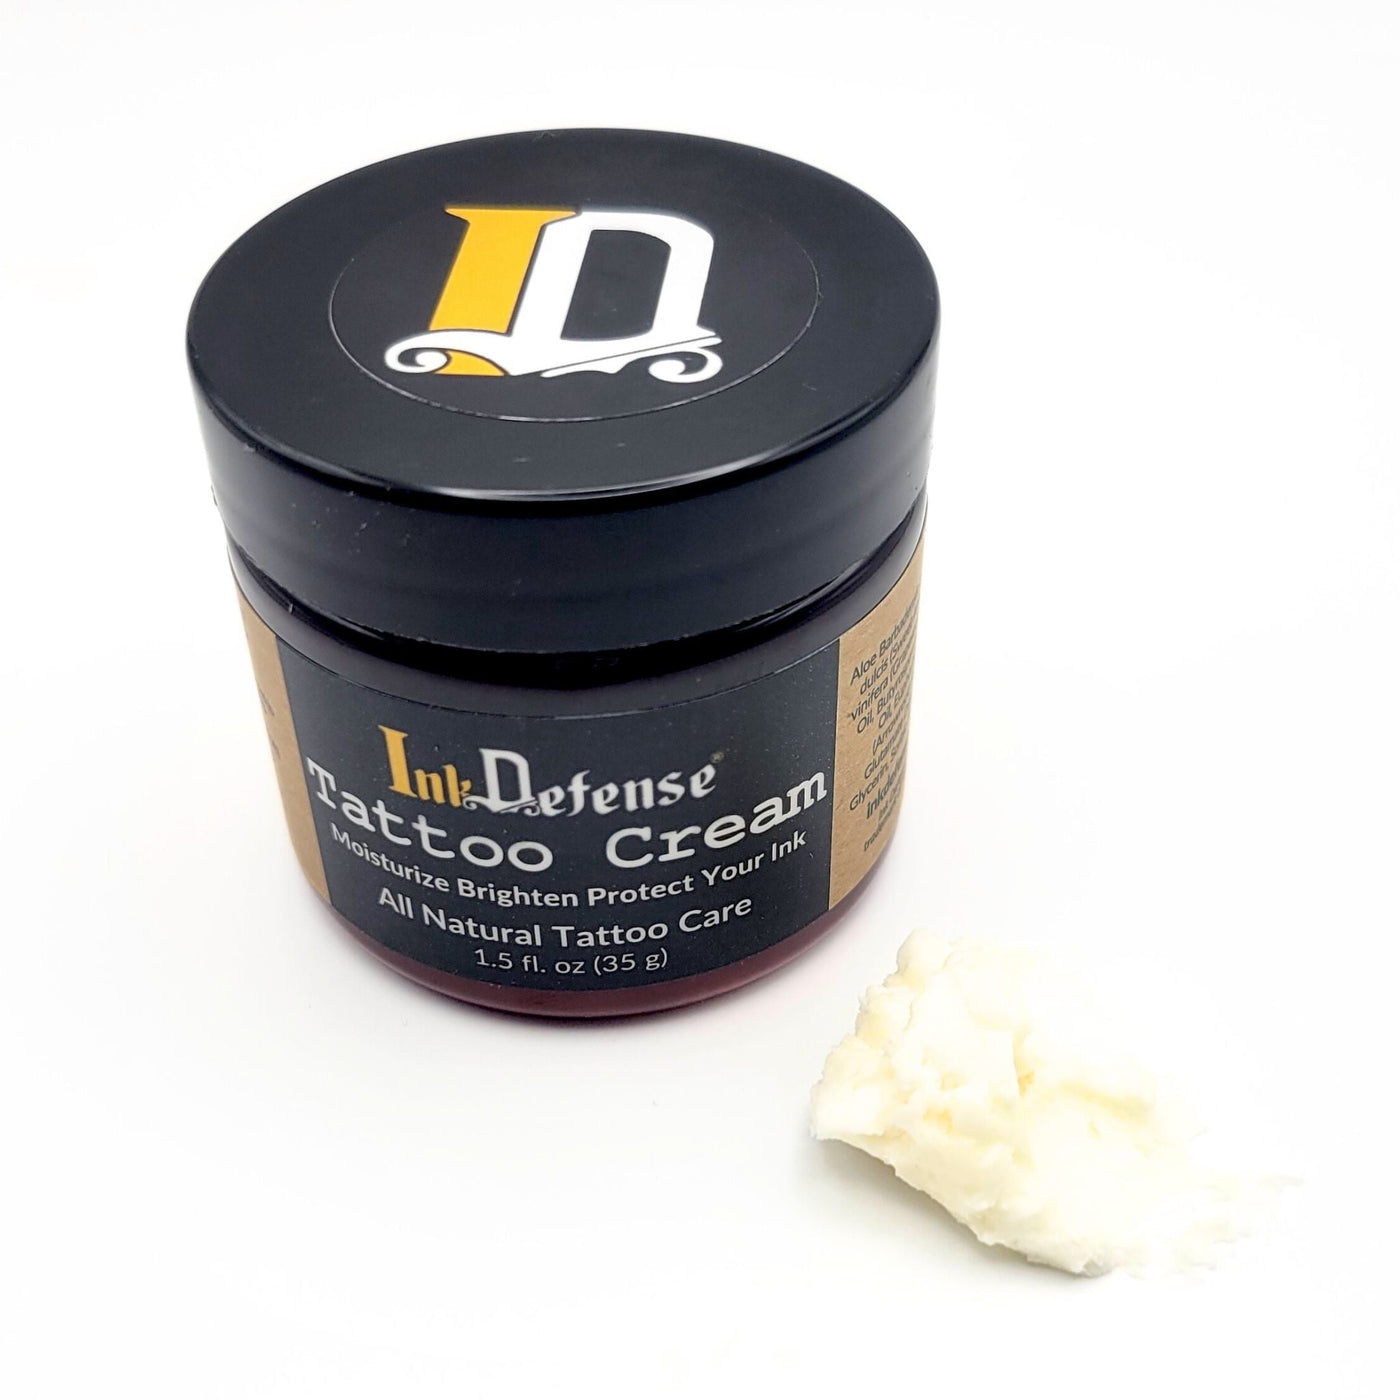 Tattoo Cream for tattoo aftercare with cream outside of container- Ink Defense